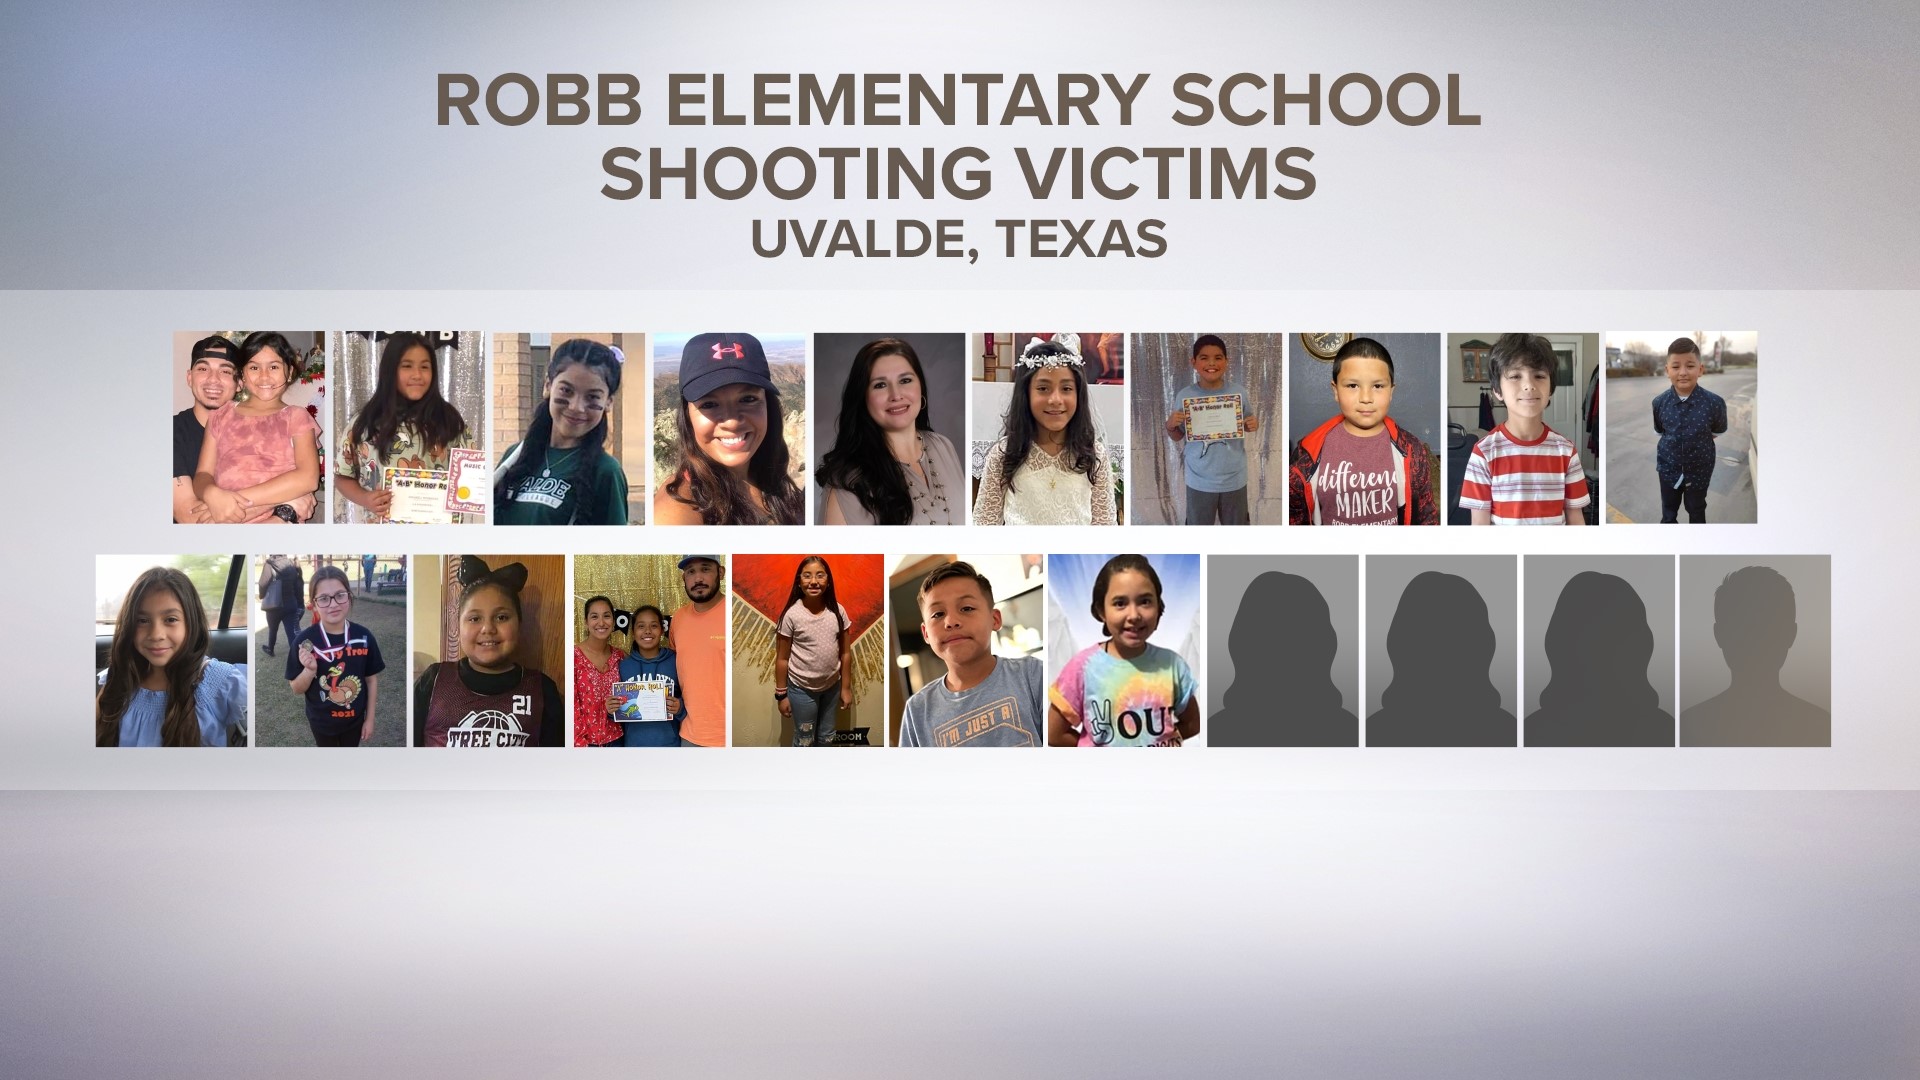 deadly shooting on texas school 21 people died